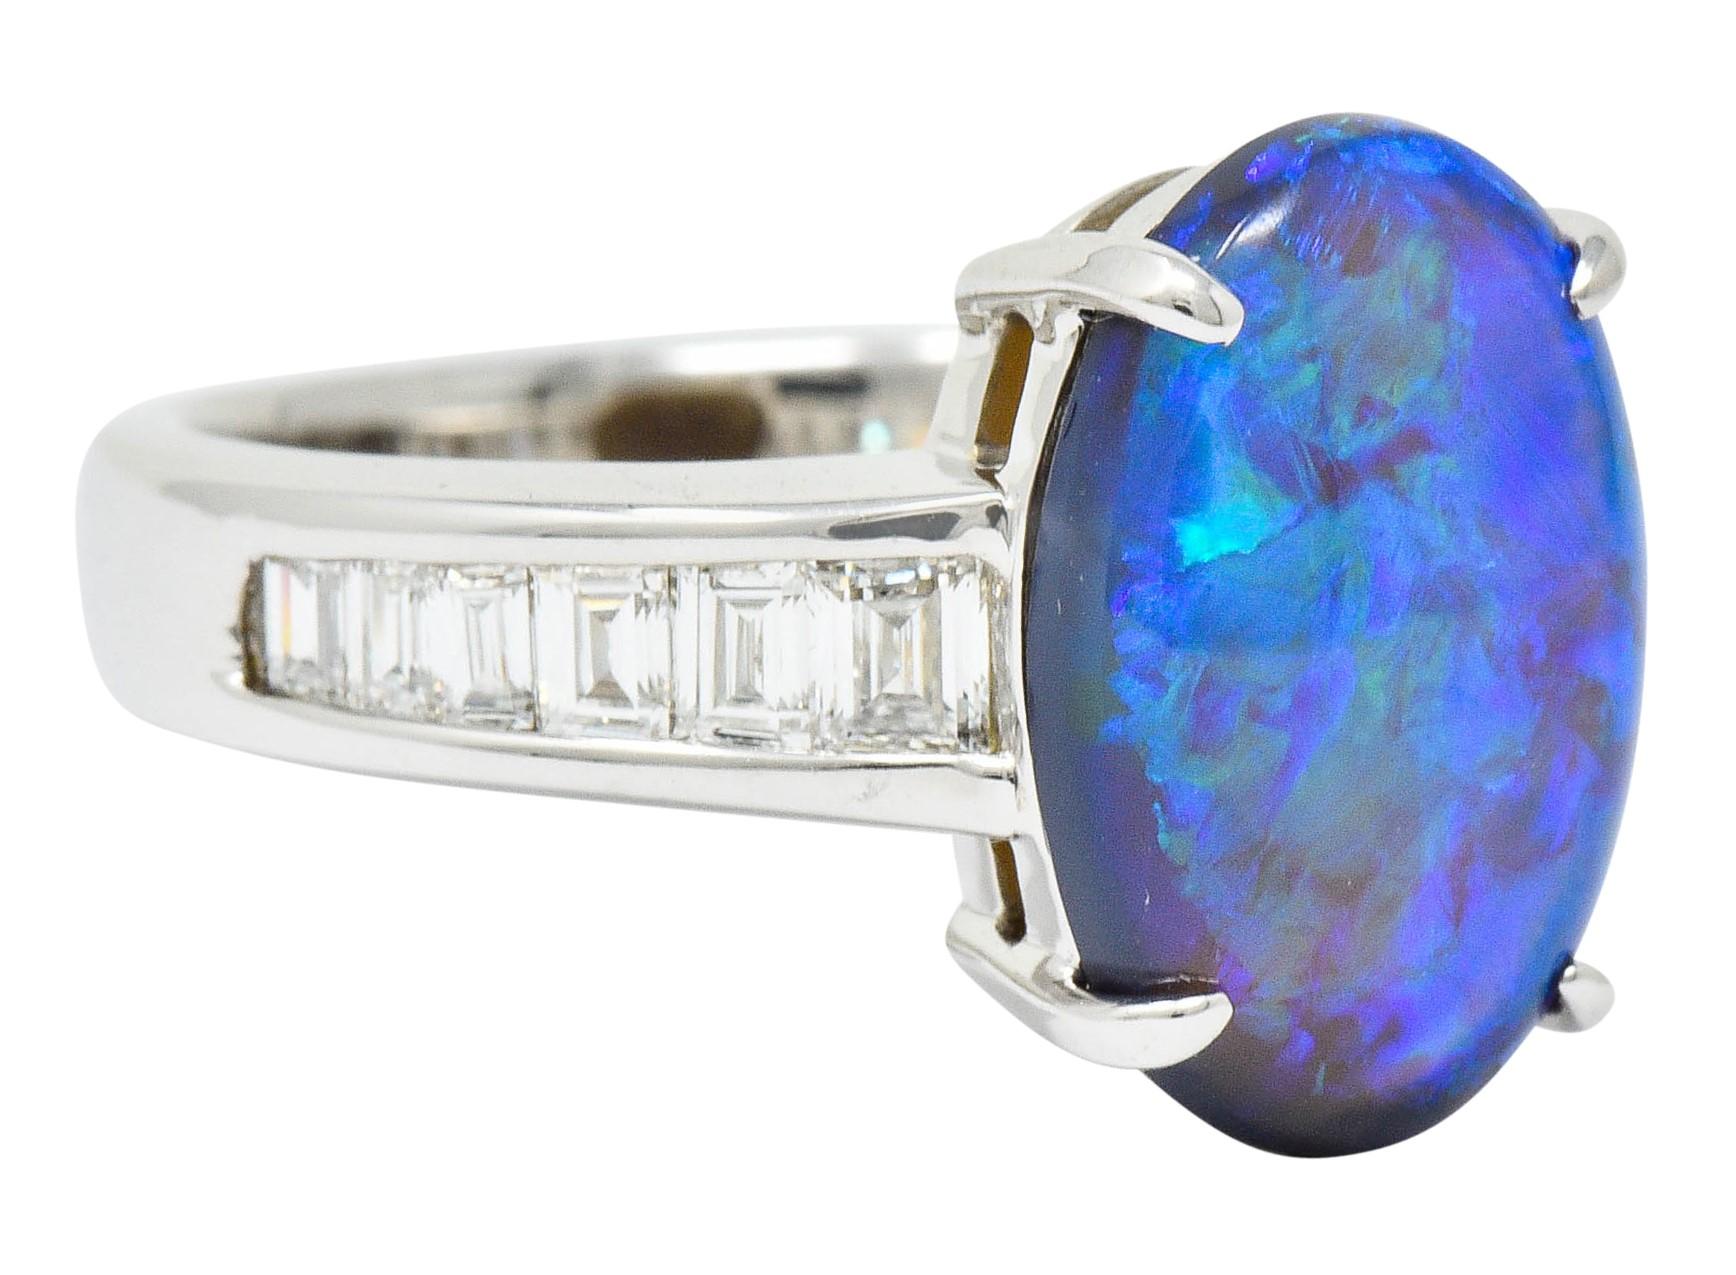 Centering an oval cut opal cabochon measuring approximately 13.5 x 9.2 mm

Basket set and translucent with strong violet, blue, green play-of-color

Shoulders are channel set with baguette cut diamonds

Weighing in total approximately 1.27 carats